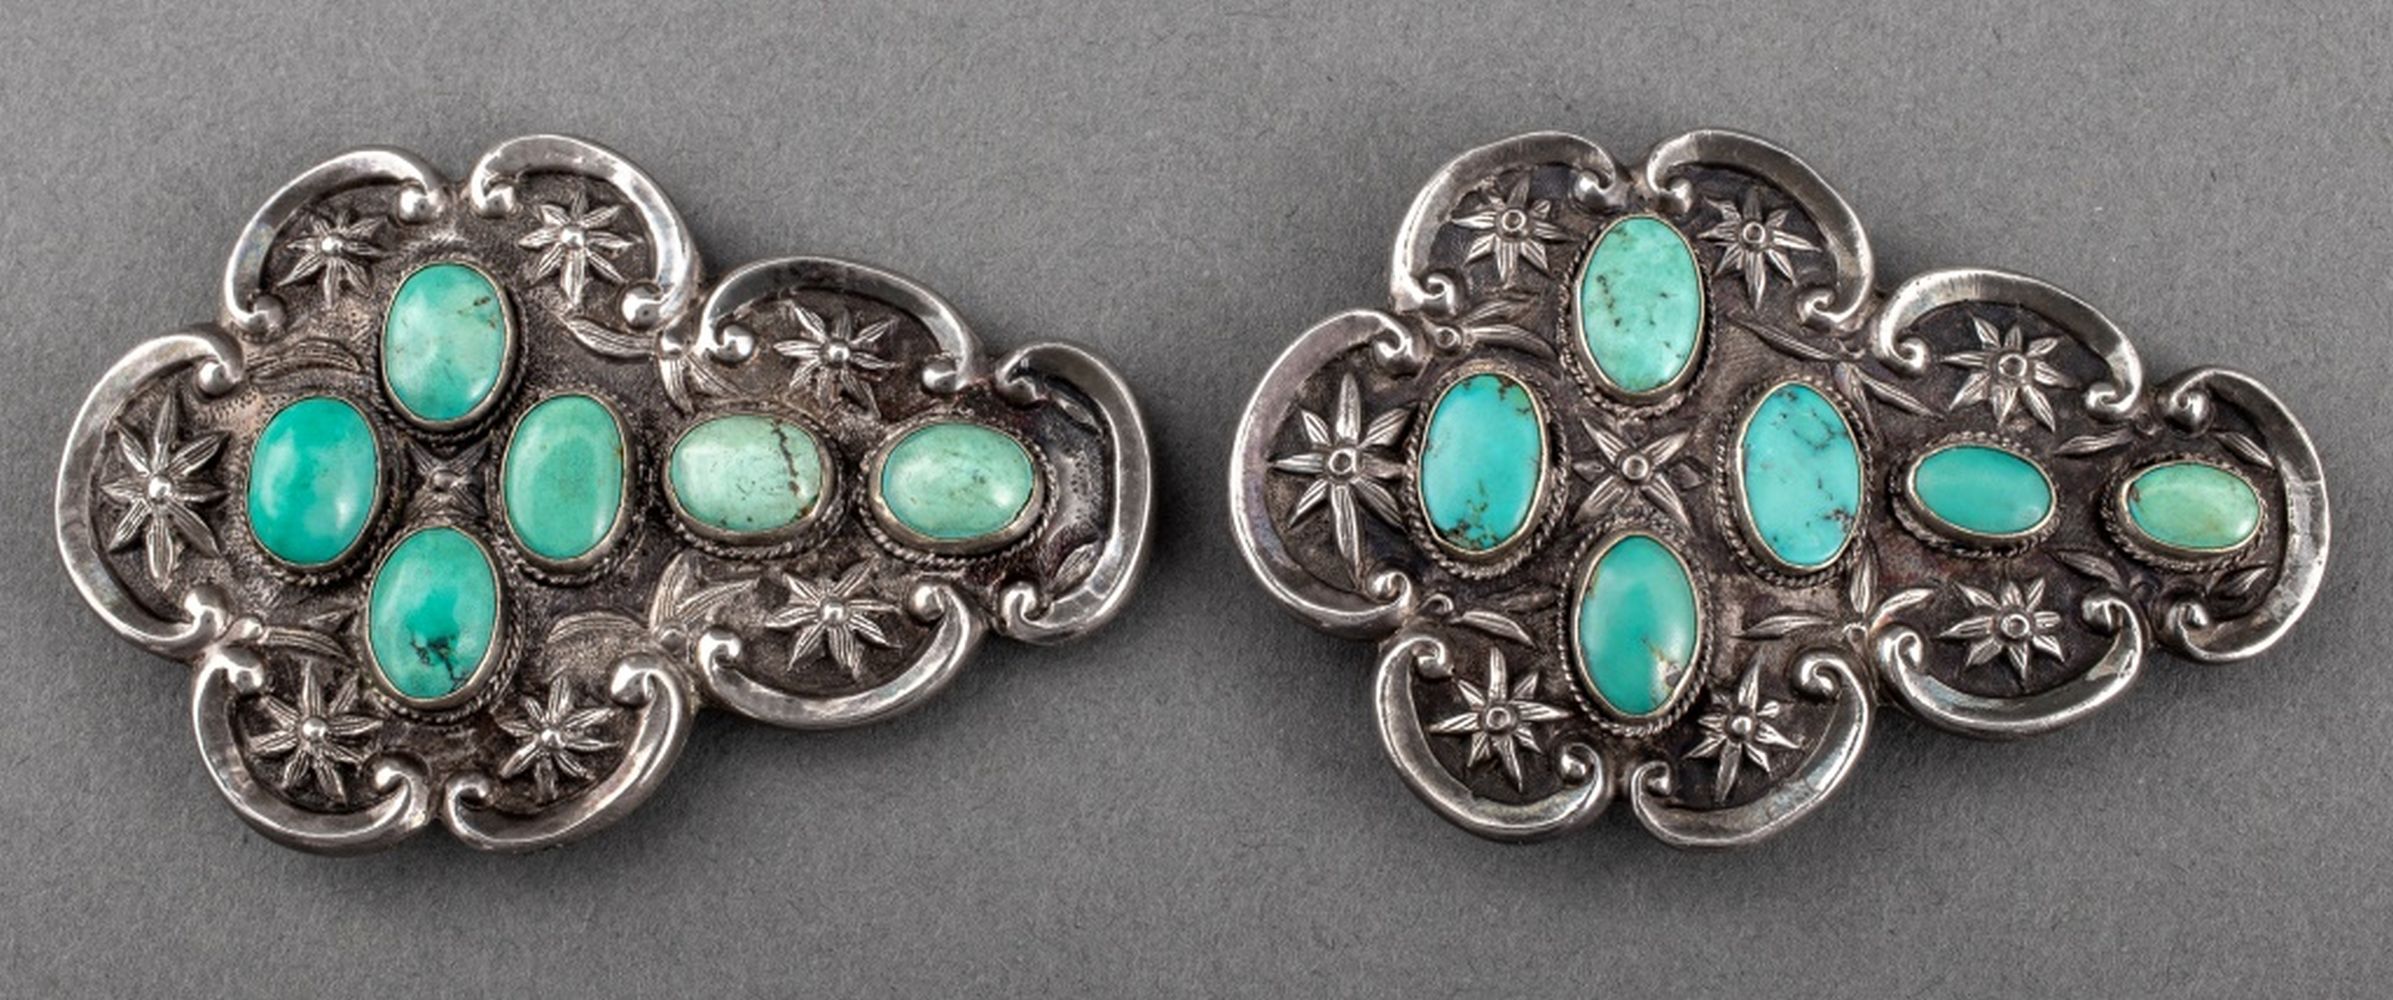 CHINESE SILVER TURQUOISE BUCKLES  3b4bd1